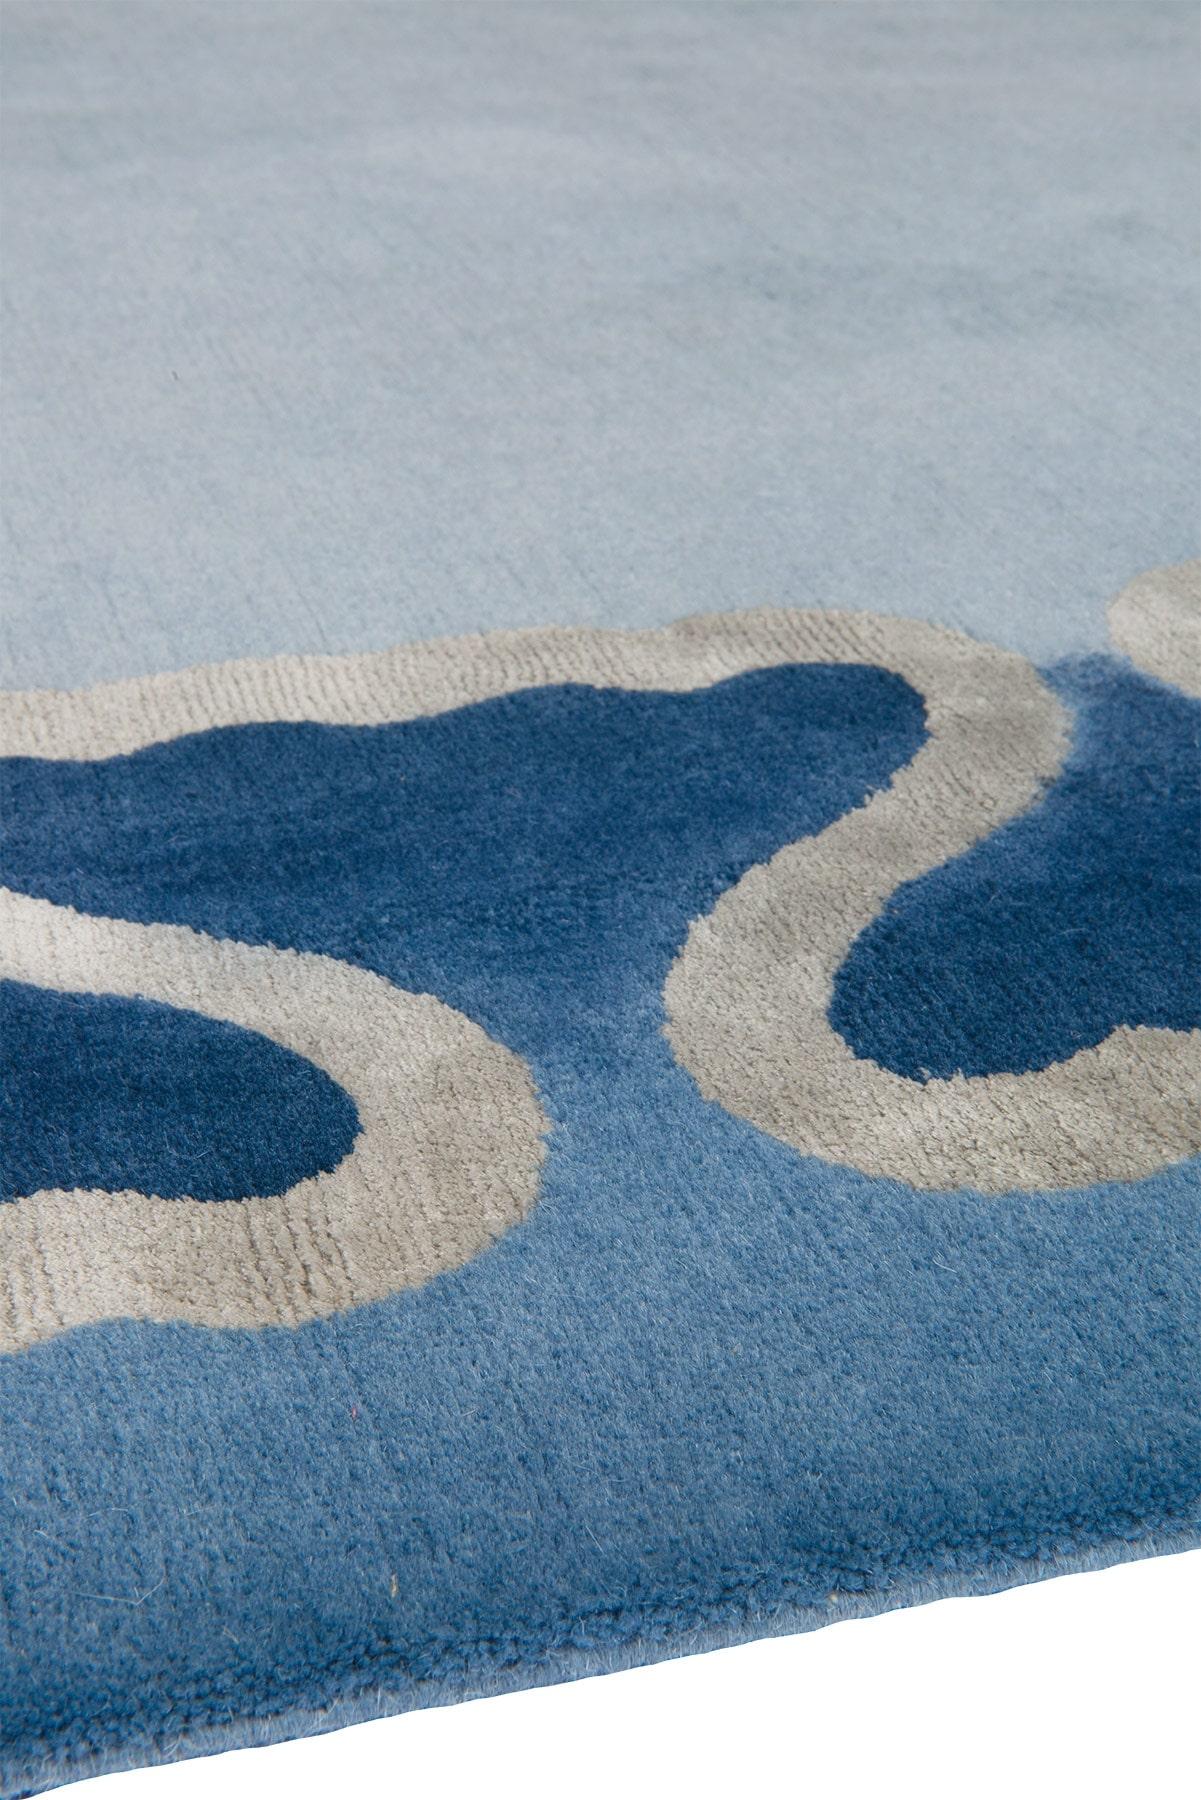 Characterised by its aquatic nature, Pisces presents an ornamental fishtail border. Accents of gold silk are complemented by a deep blue ombre effect, accentuating the sense of waves rolling around the border of the rug.
  